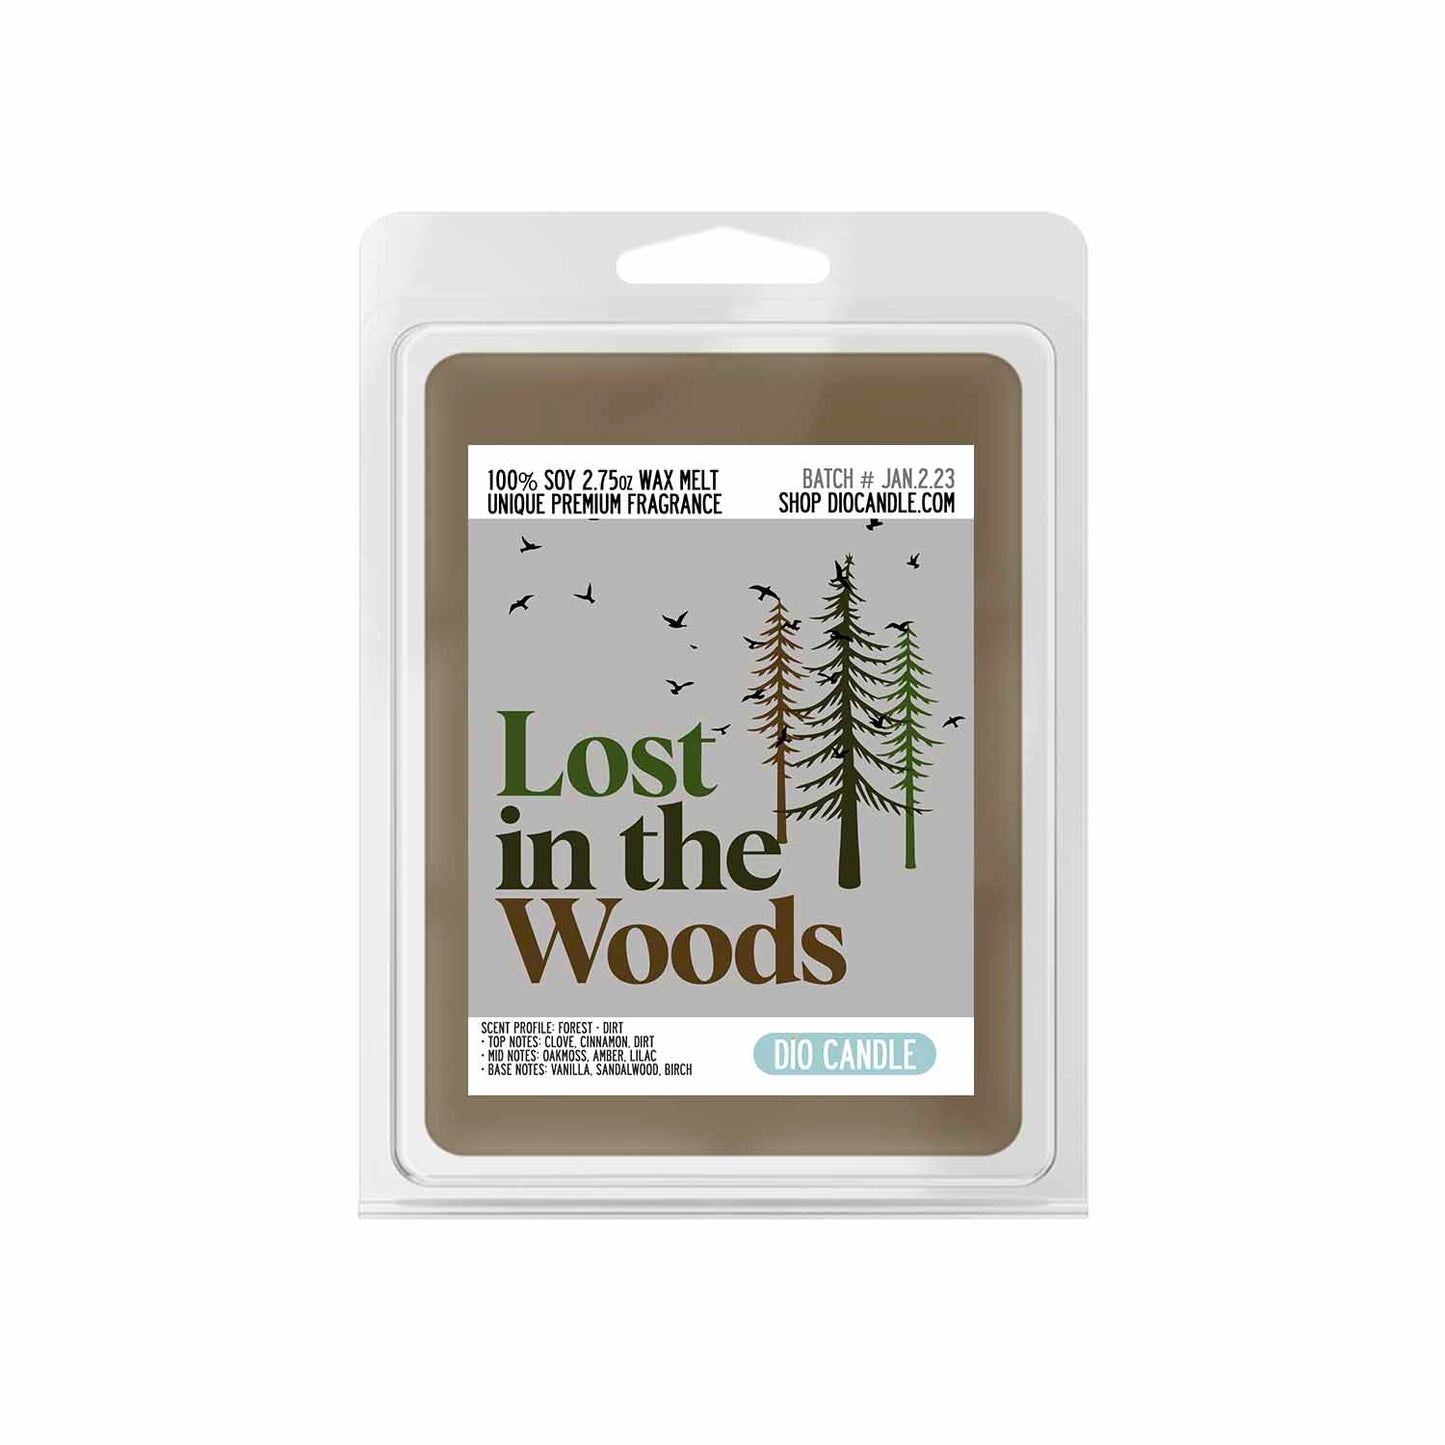 Lost in the Woods Candle